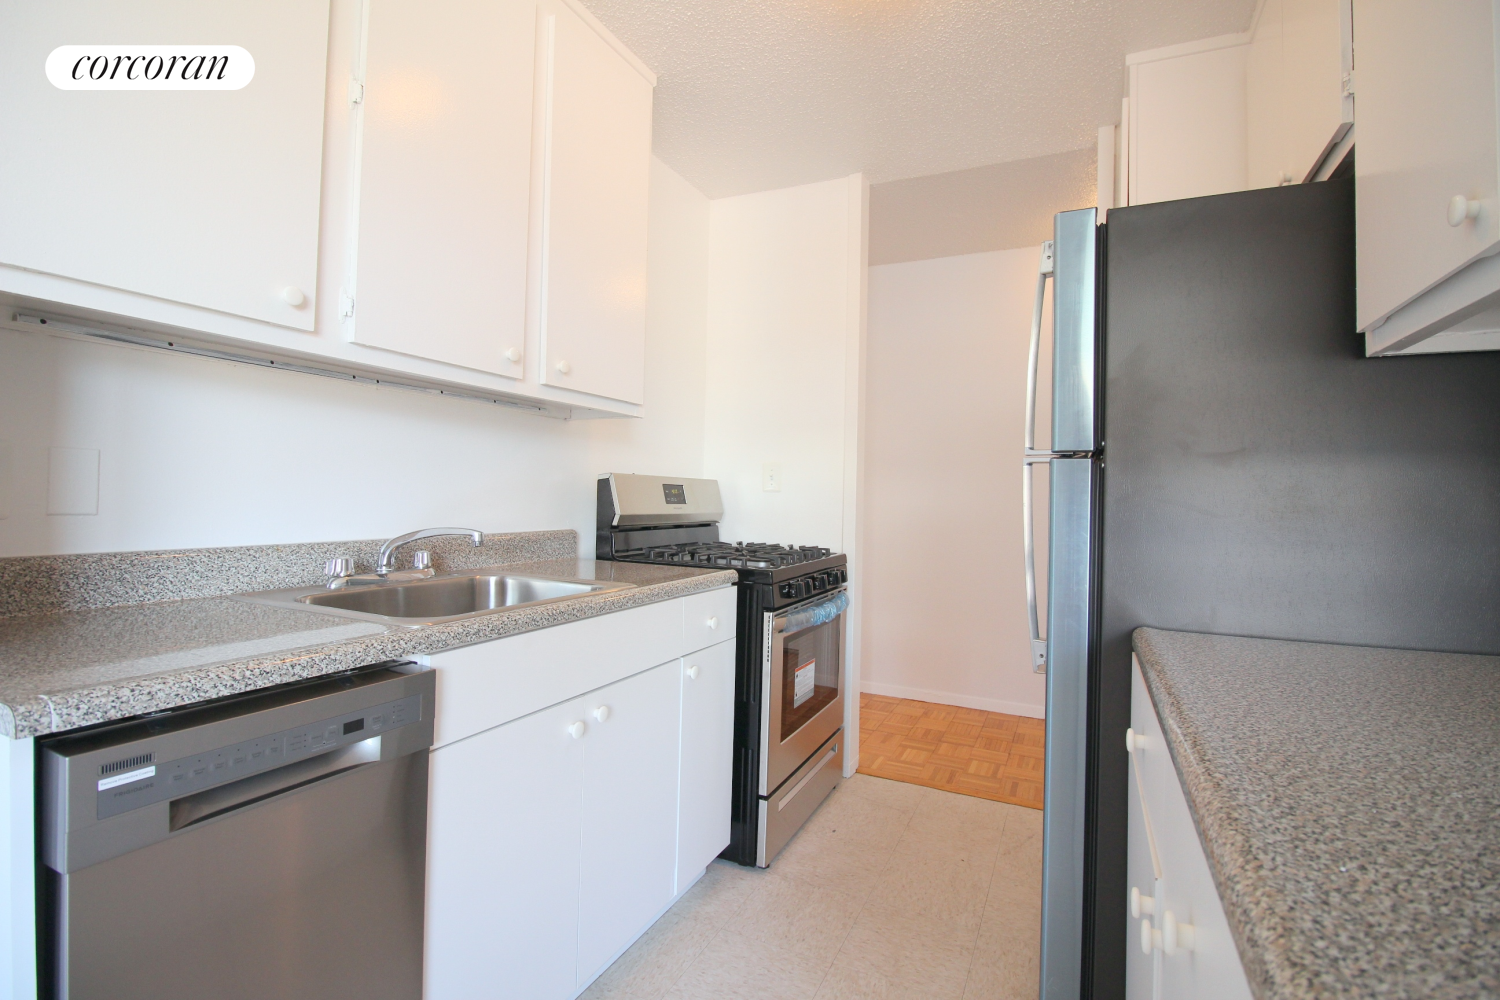 401 2nd Avenue 5C, Gramercy Park And Murray Hill, Downtown, NYC - 1 Bedrooms  
1 Bathrooms  
4 Rooms - 